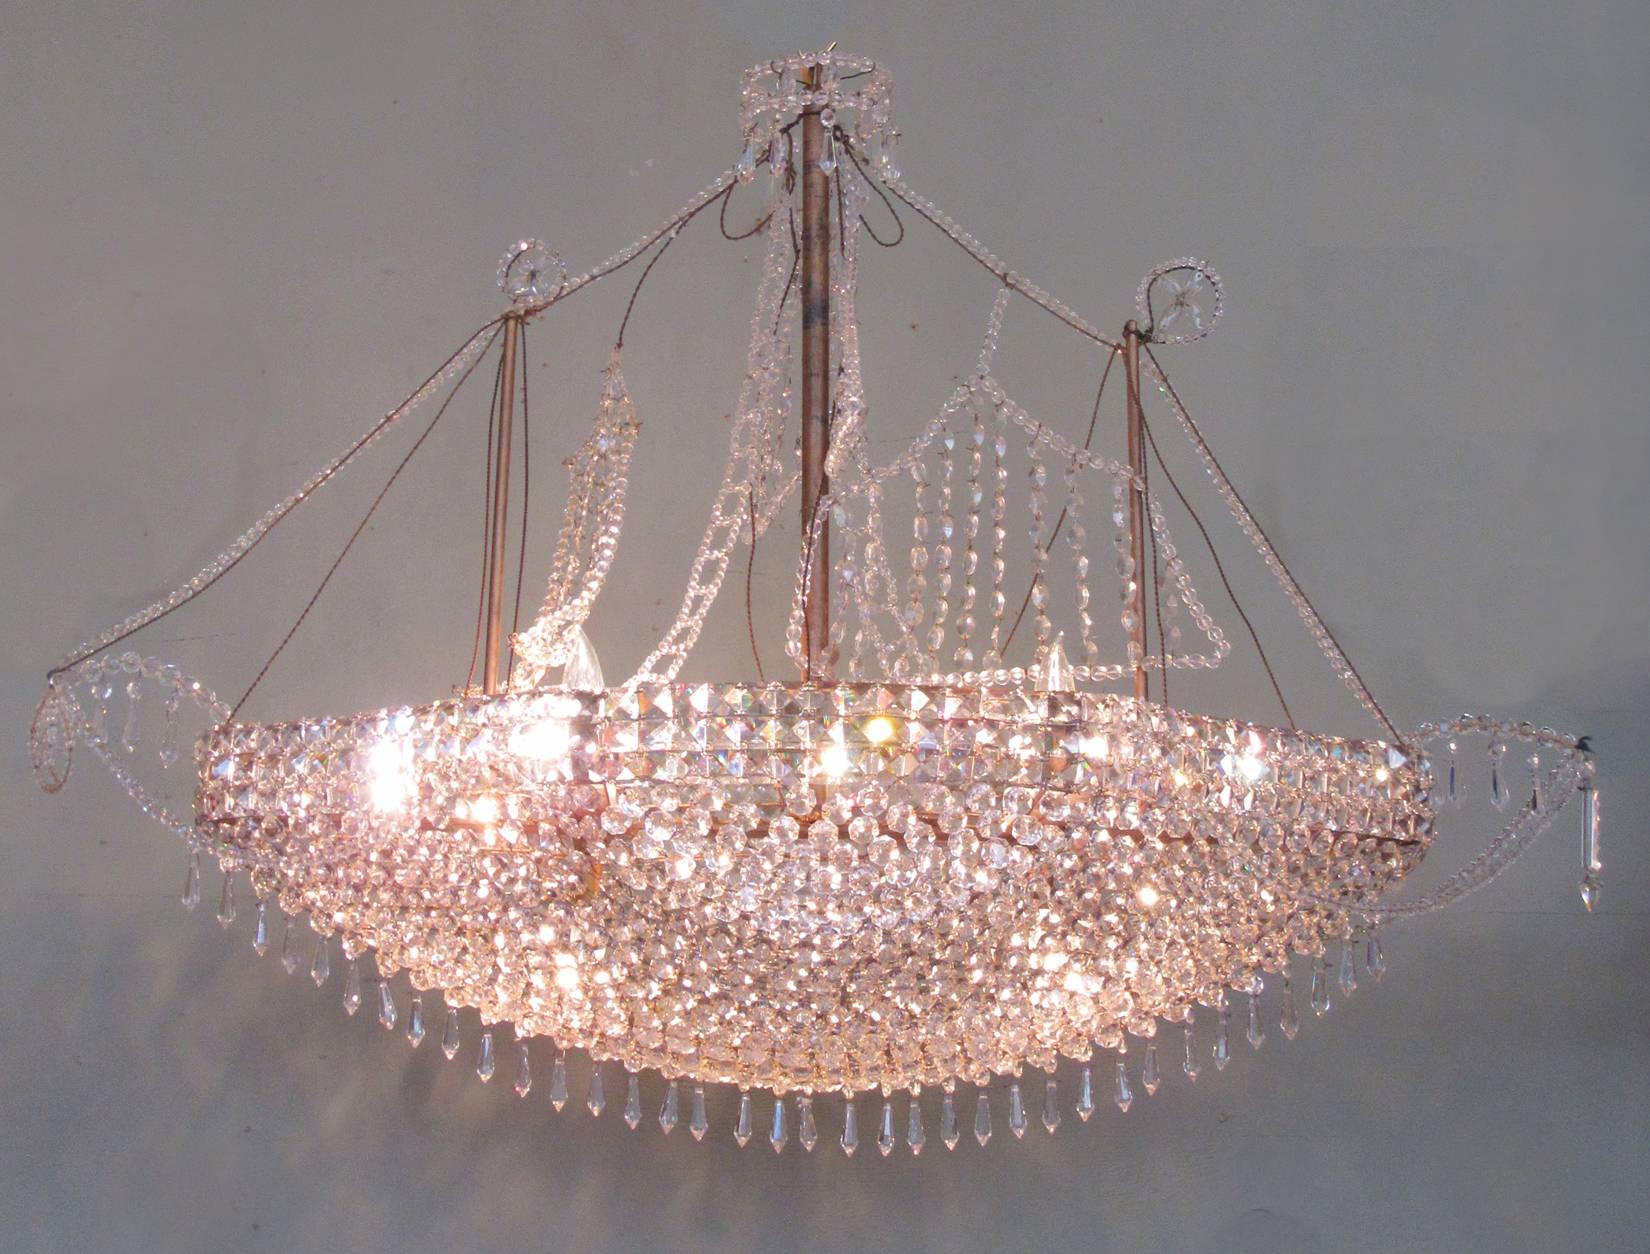 This chandelier was made in the mid-20th century, circa 1960. This chandelier is made of French crystal and features several different sizes of crystal beads formed into the shape of a chinoiserie ship. It is truly magnificent in person! The fixture